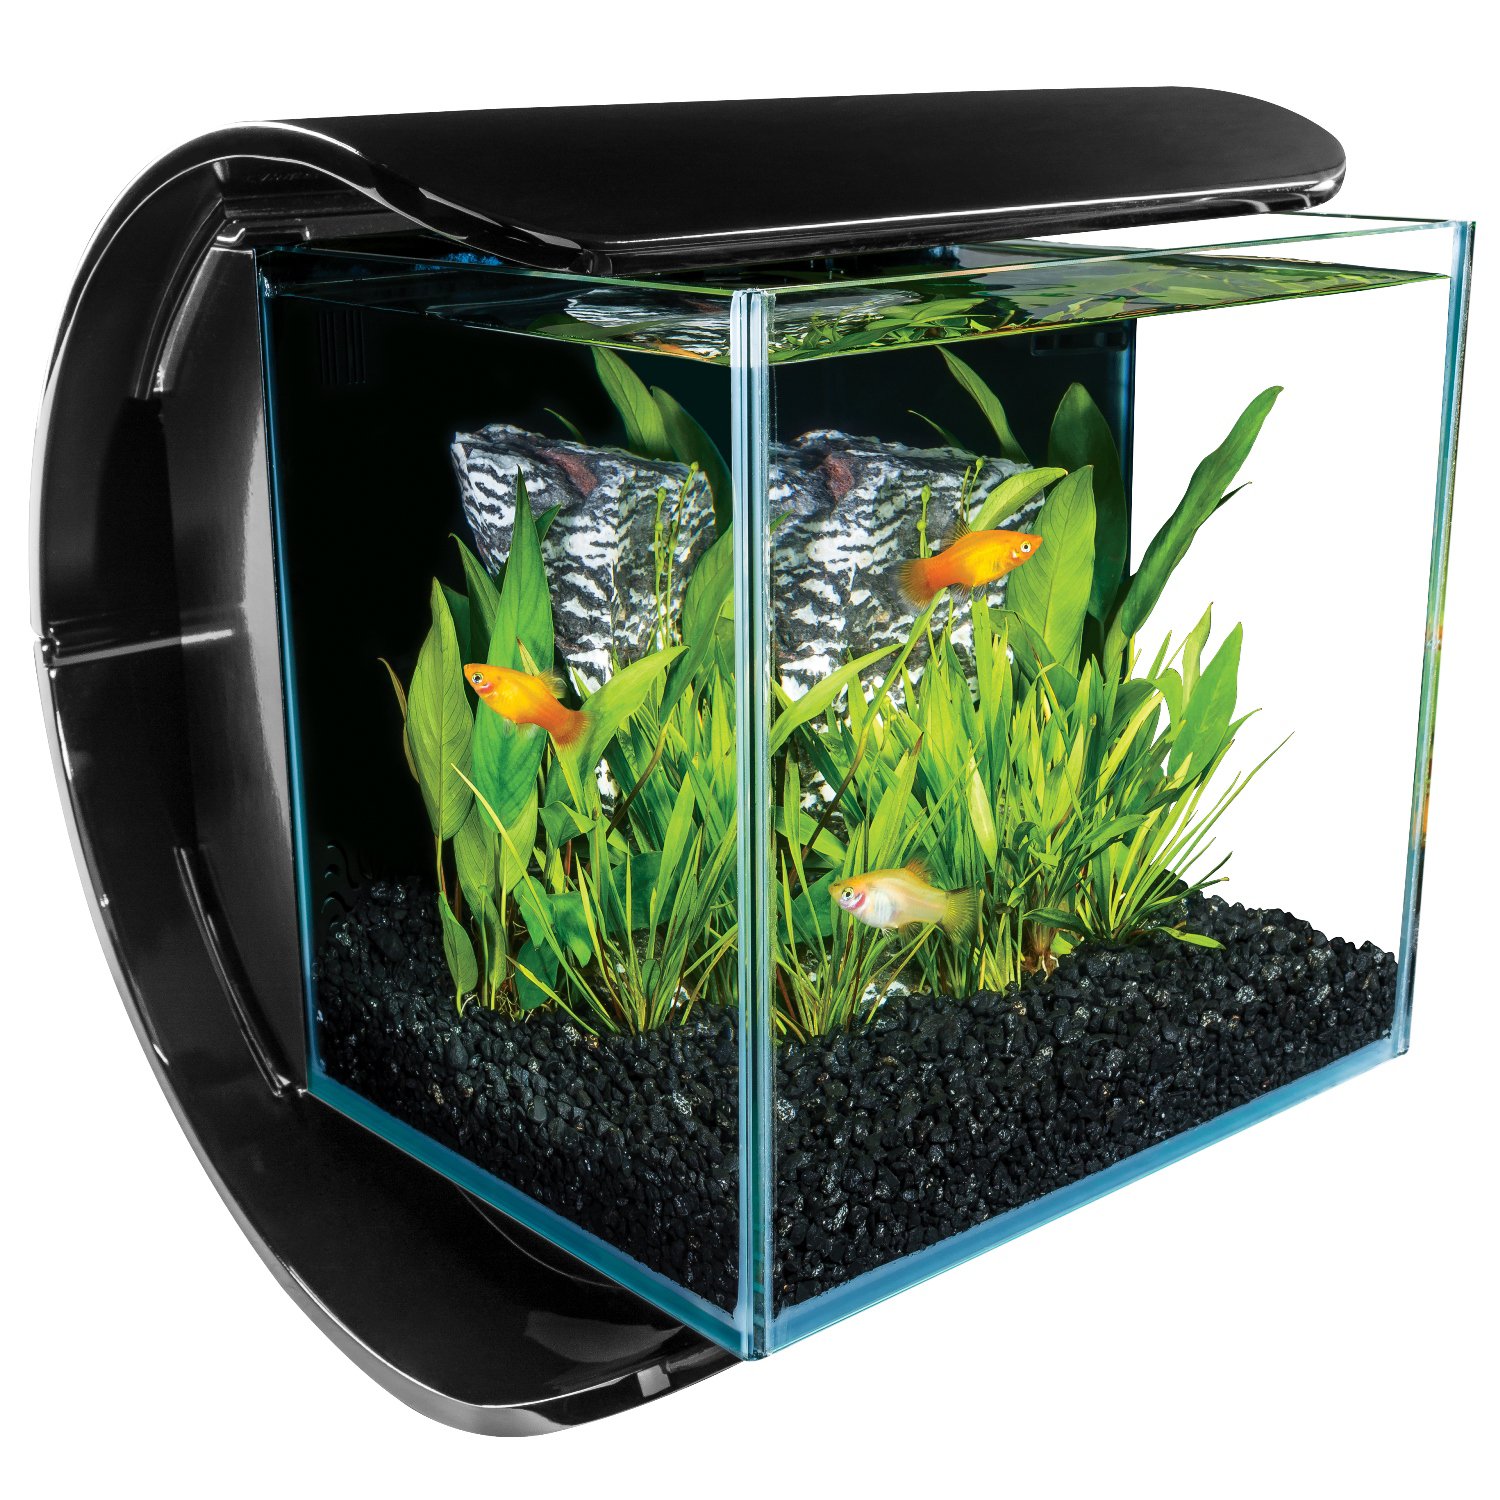 Images of Fish Tank | 1500x1500